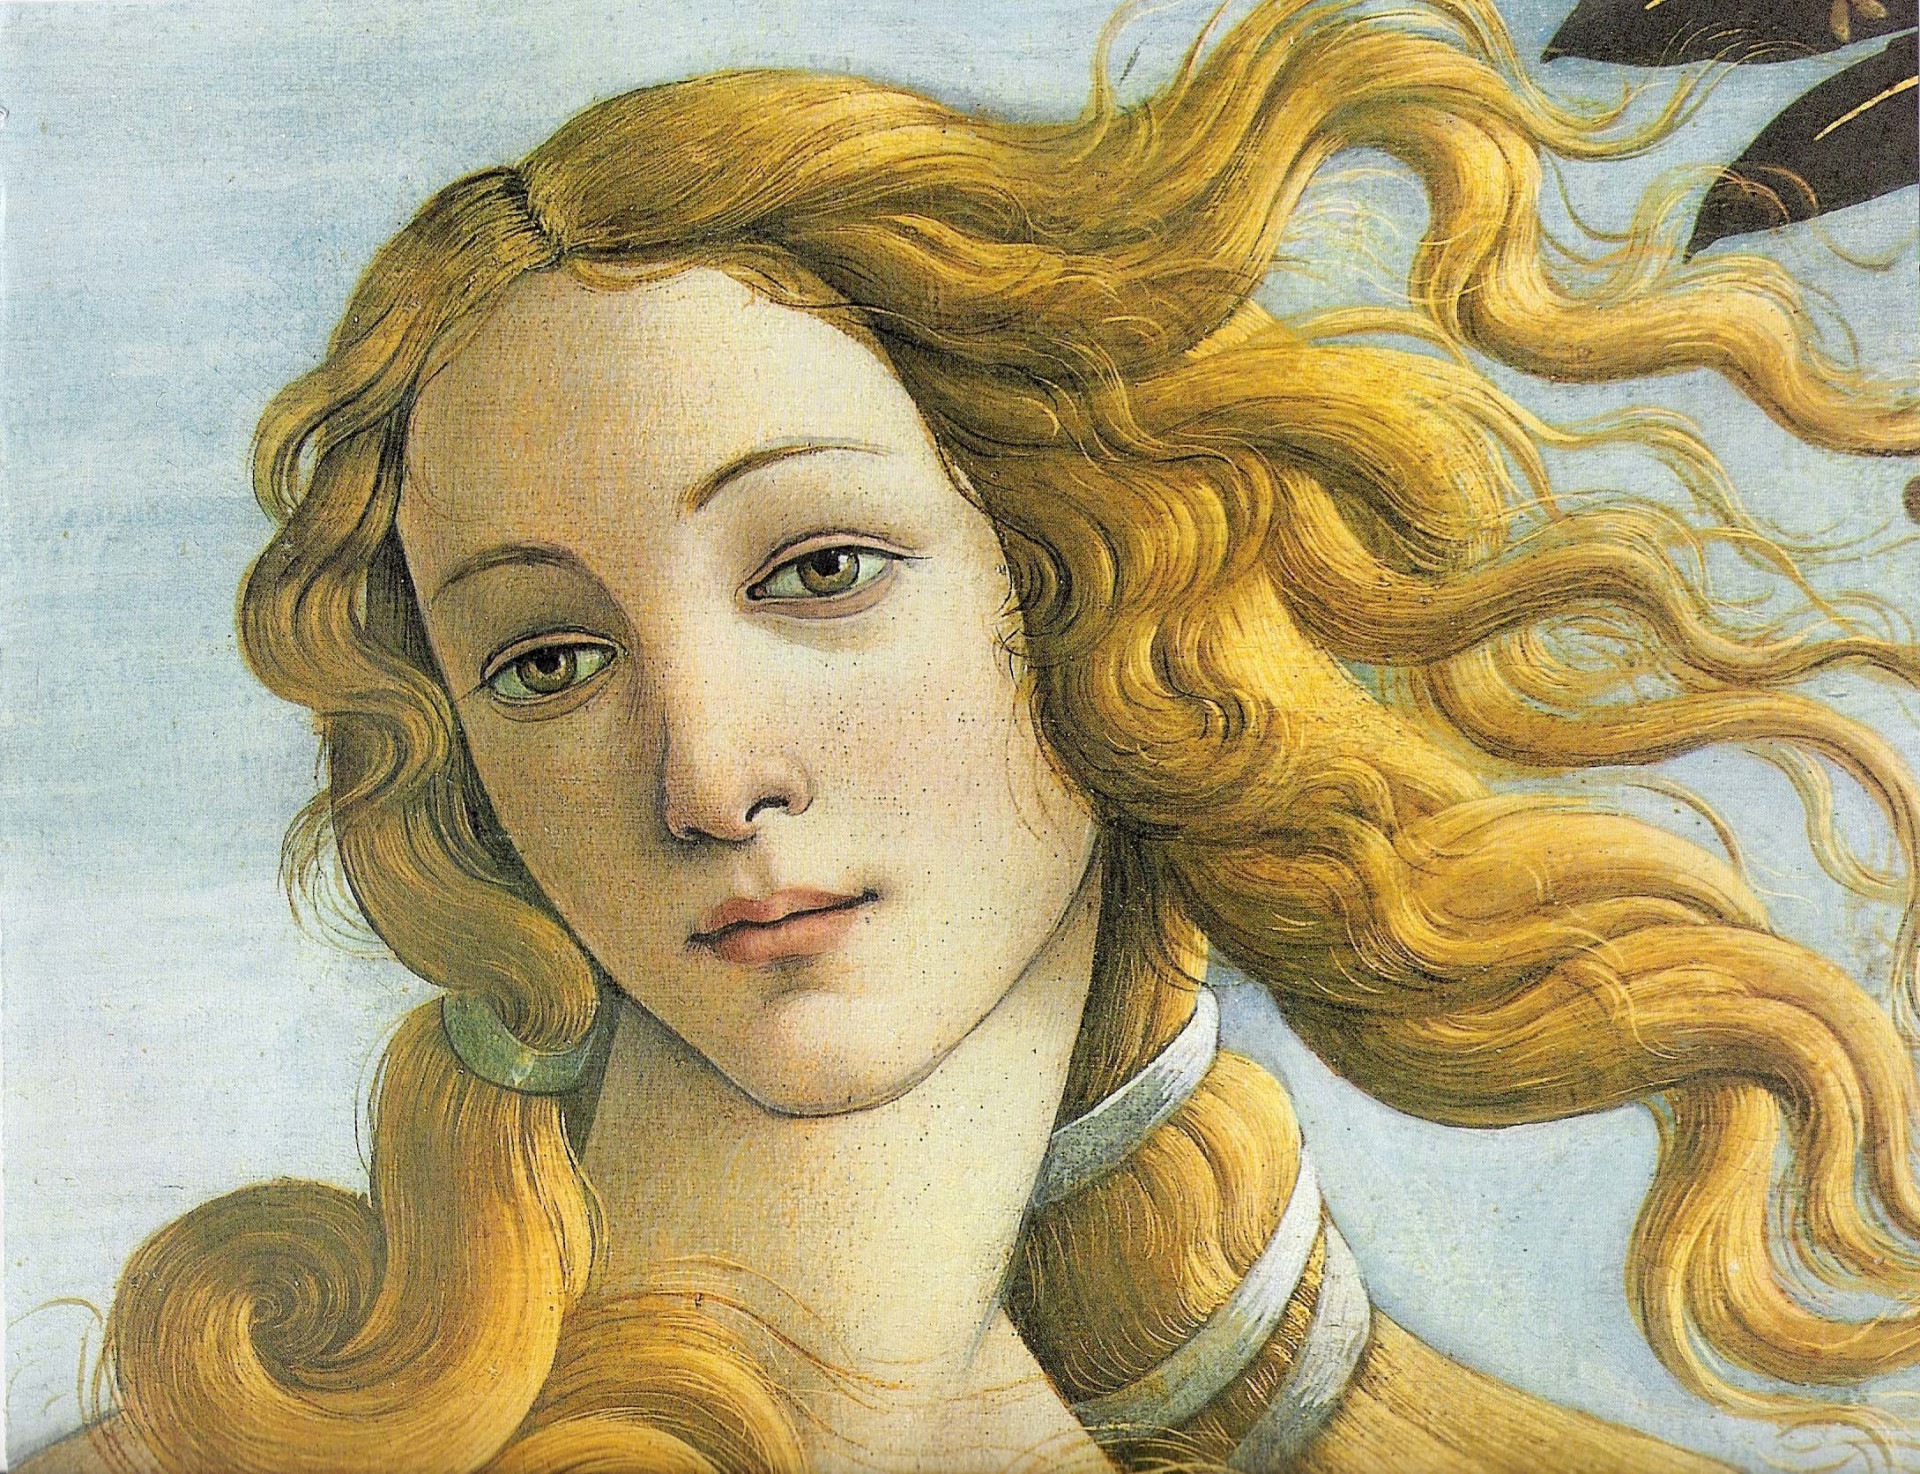 <p>Crafted by Sandro Botticelli, 'The Birth of Venus' is an iconic Renaissance masterpiece from the mid-1480s. Venus's golden hair is the focus here, as it curls around, creating a near mathematical curl that has since entranced viewers over the centuries. In the 17th century, mathematician Jacob Bernoulli named the curl 'spira mirabilis,' which translates into 'marvelous spiral.' It's said the same curl is seen in sea shells and in the movement of birds.</p><p>You may also like:<a href="https://www.starsinsider.com/n/405984?utm_source=msn.com&utm_medium=display&utm_campaign=referral_description&utm_content=622678v1en-en"> The stupidest excuses for war in history</a></p>